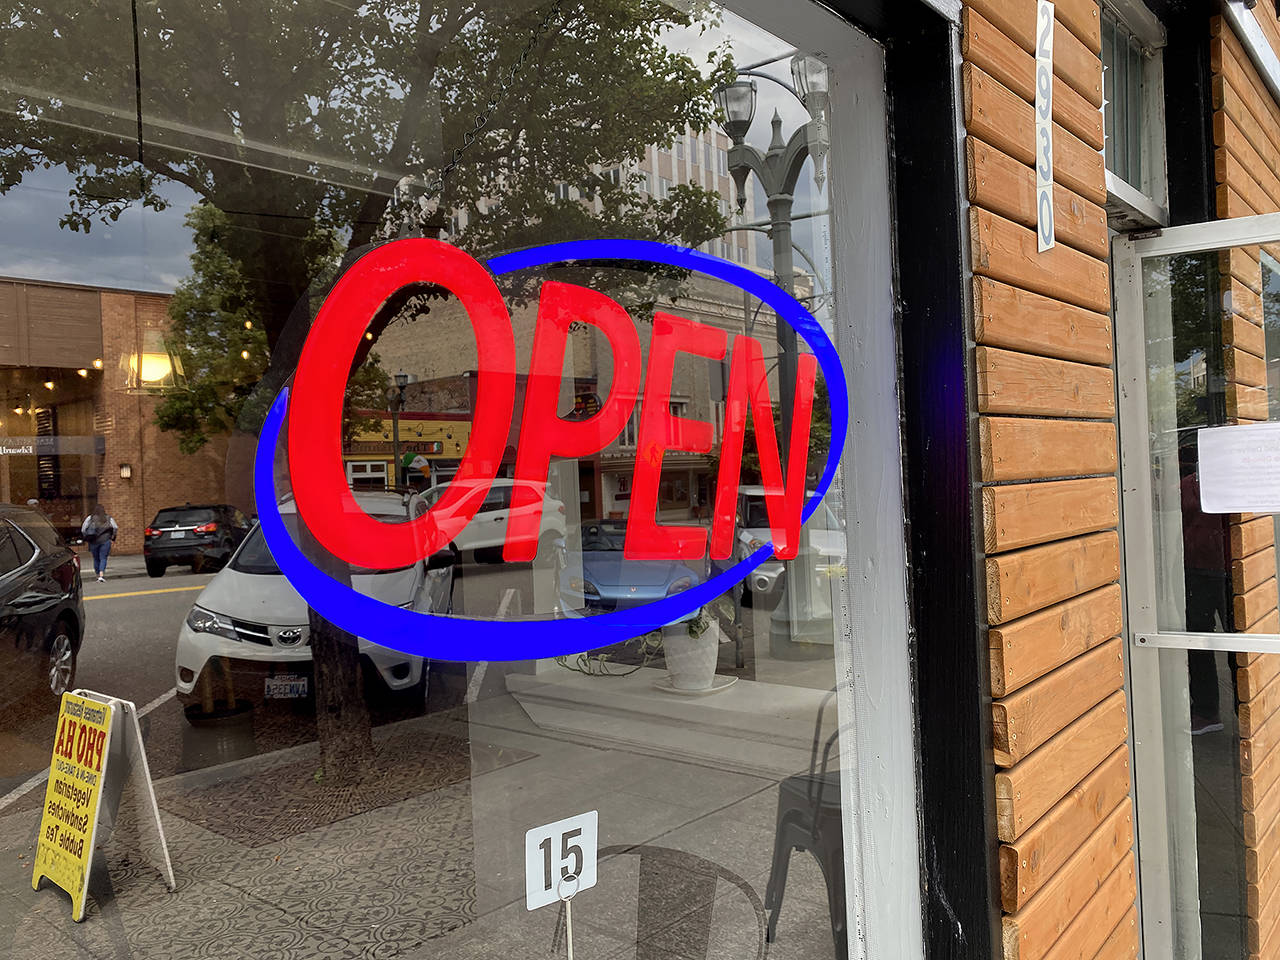 A restaurant on Colby Avenue in Everett displays its lit-up “Open” sign. (Sue Misao / The Herald)